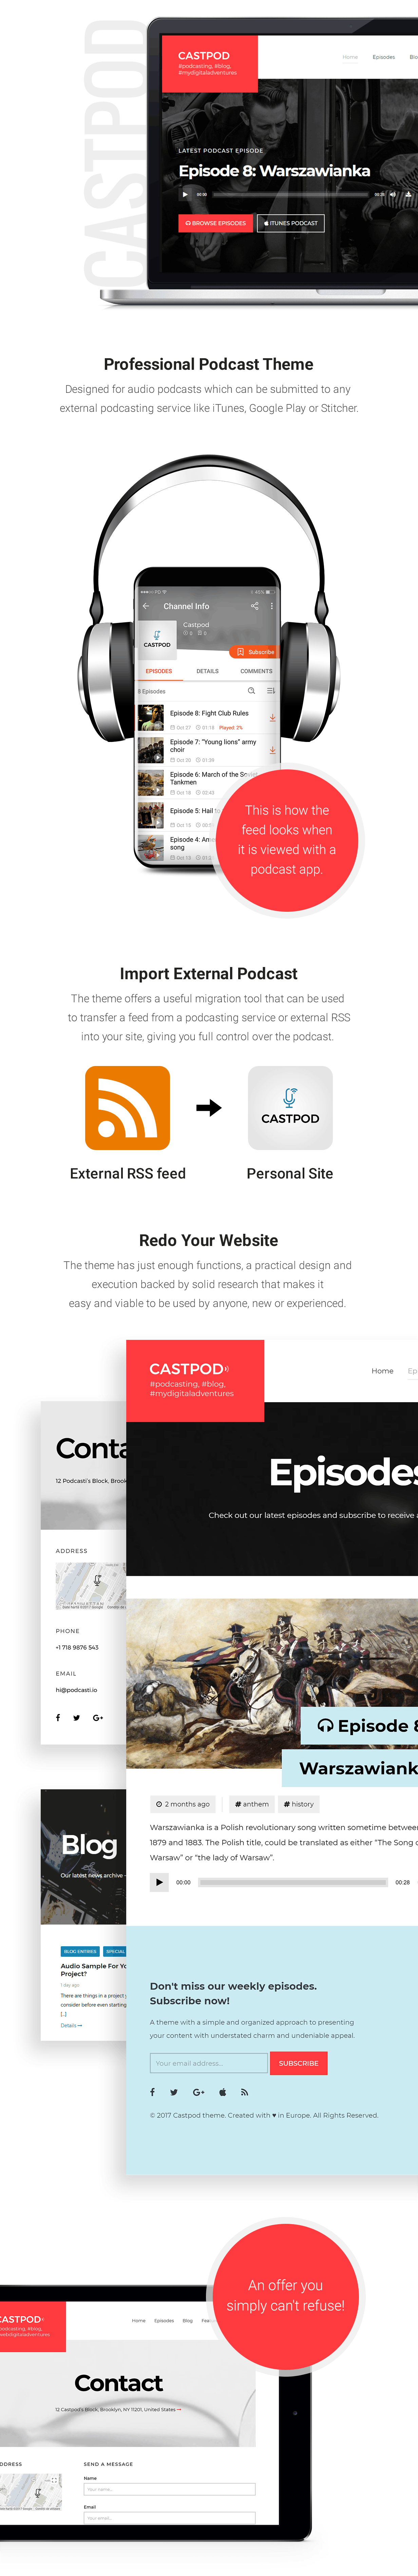 Castpod is a professional WordPress theme designed for audio podcasts, which can be submitted on any external podcasting service like iTunes, Google Play or Stitcher.